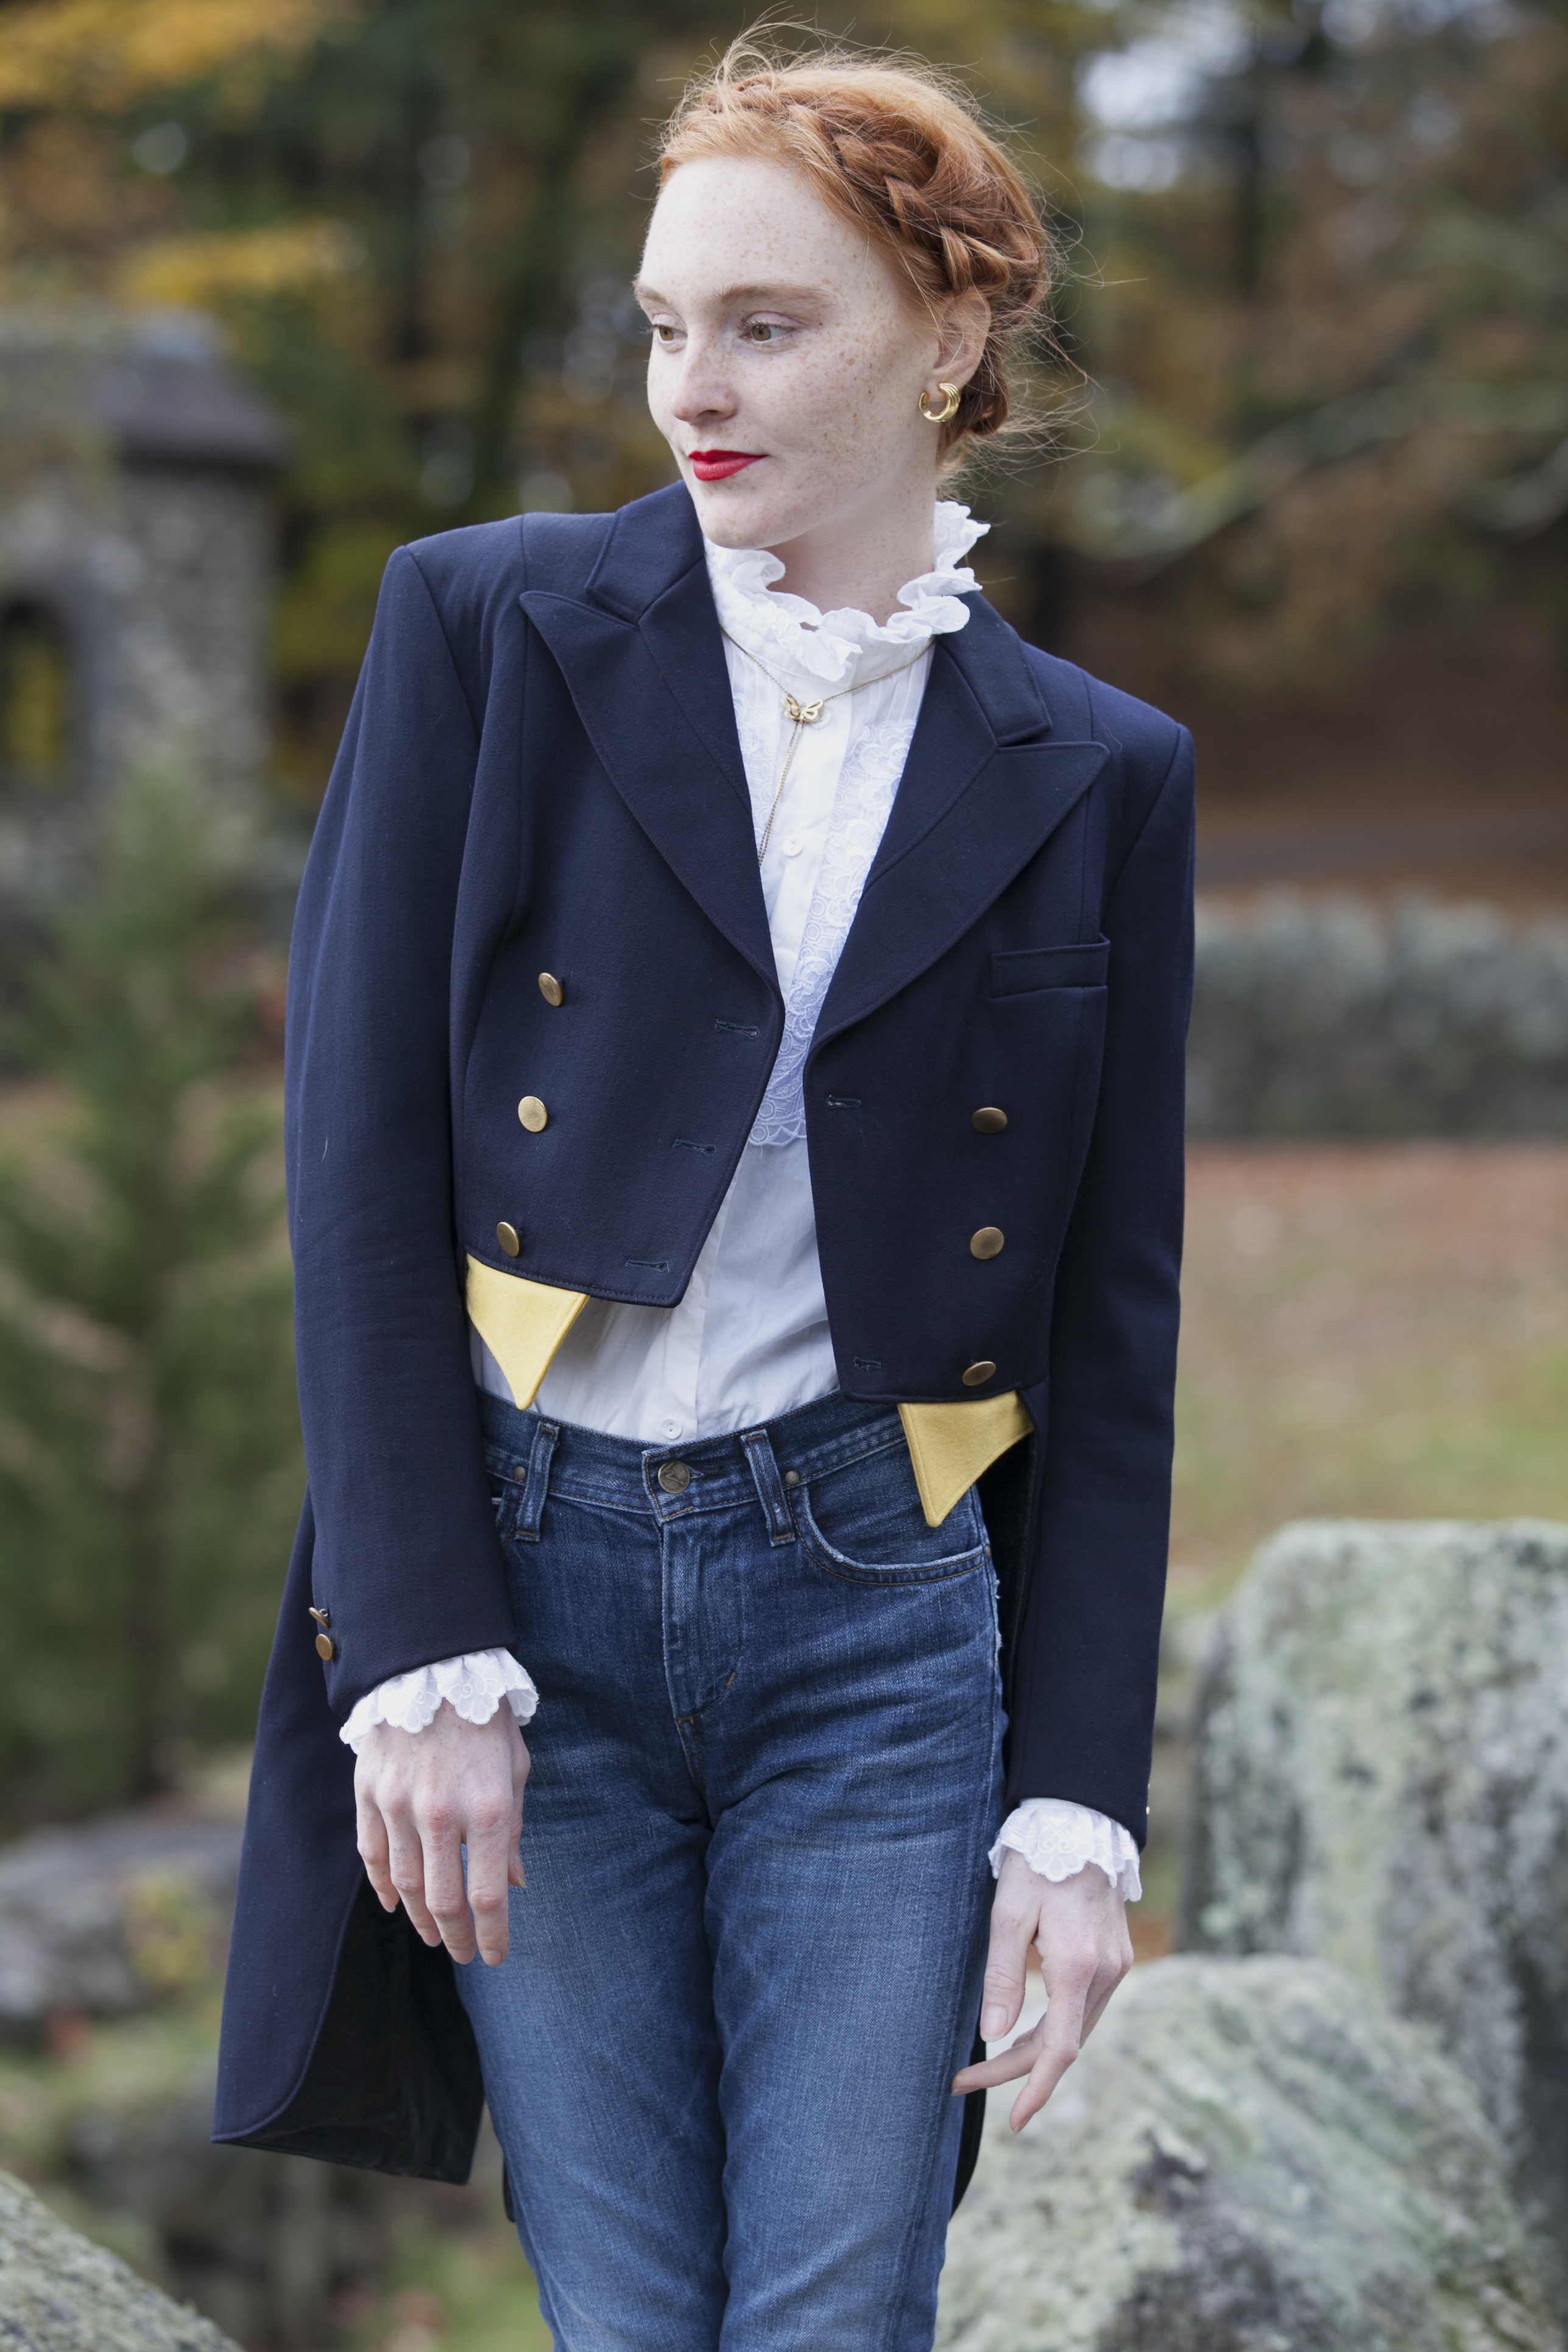 blogger wearing tailcoat and blue jeans